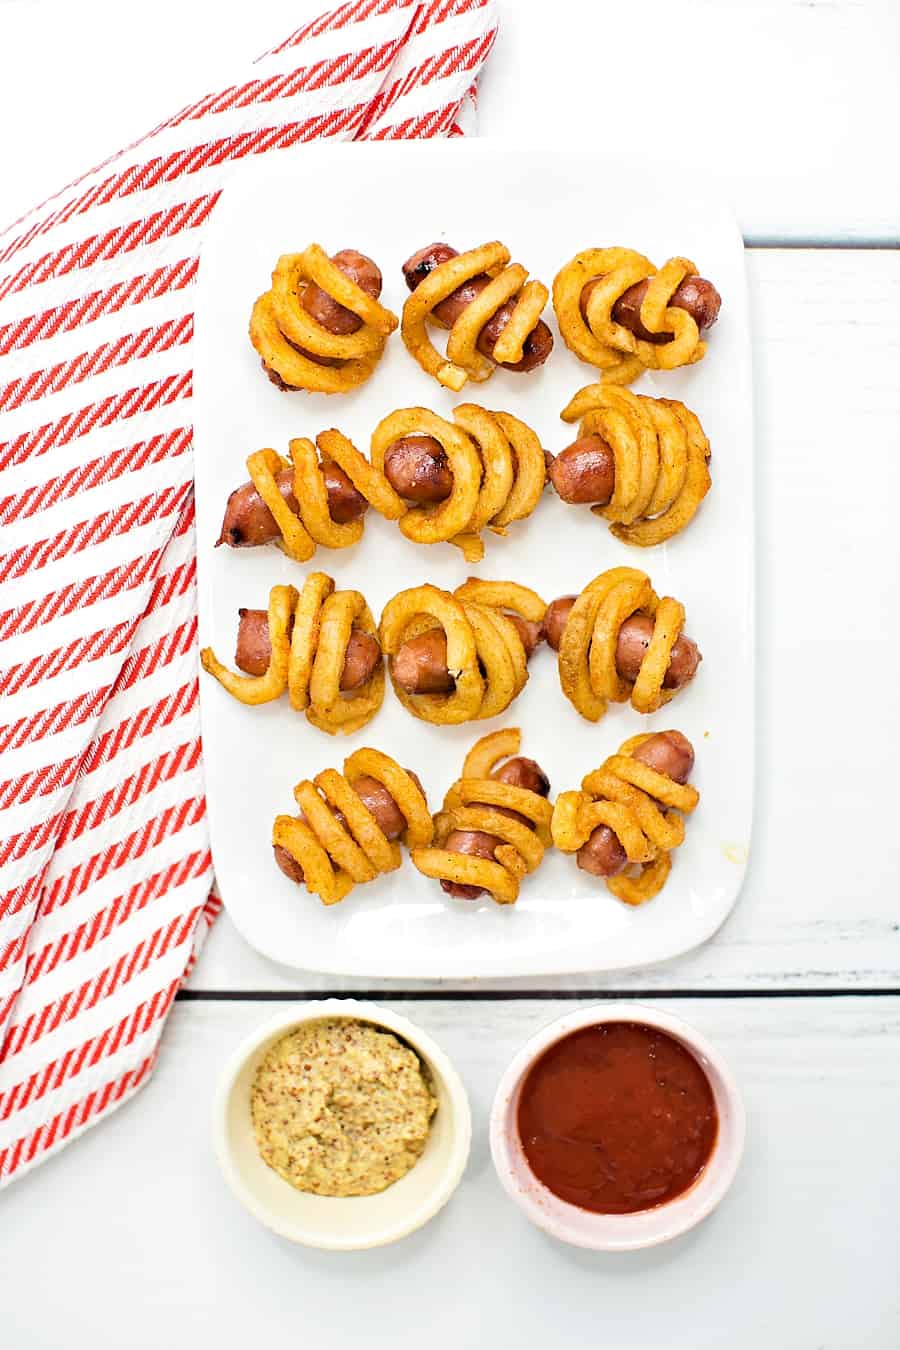 Combine two favorite iconic foods into one yummy bite-sized lunch or dinner for kids with these curly fries mini hot dogs. 